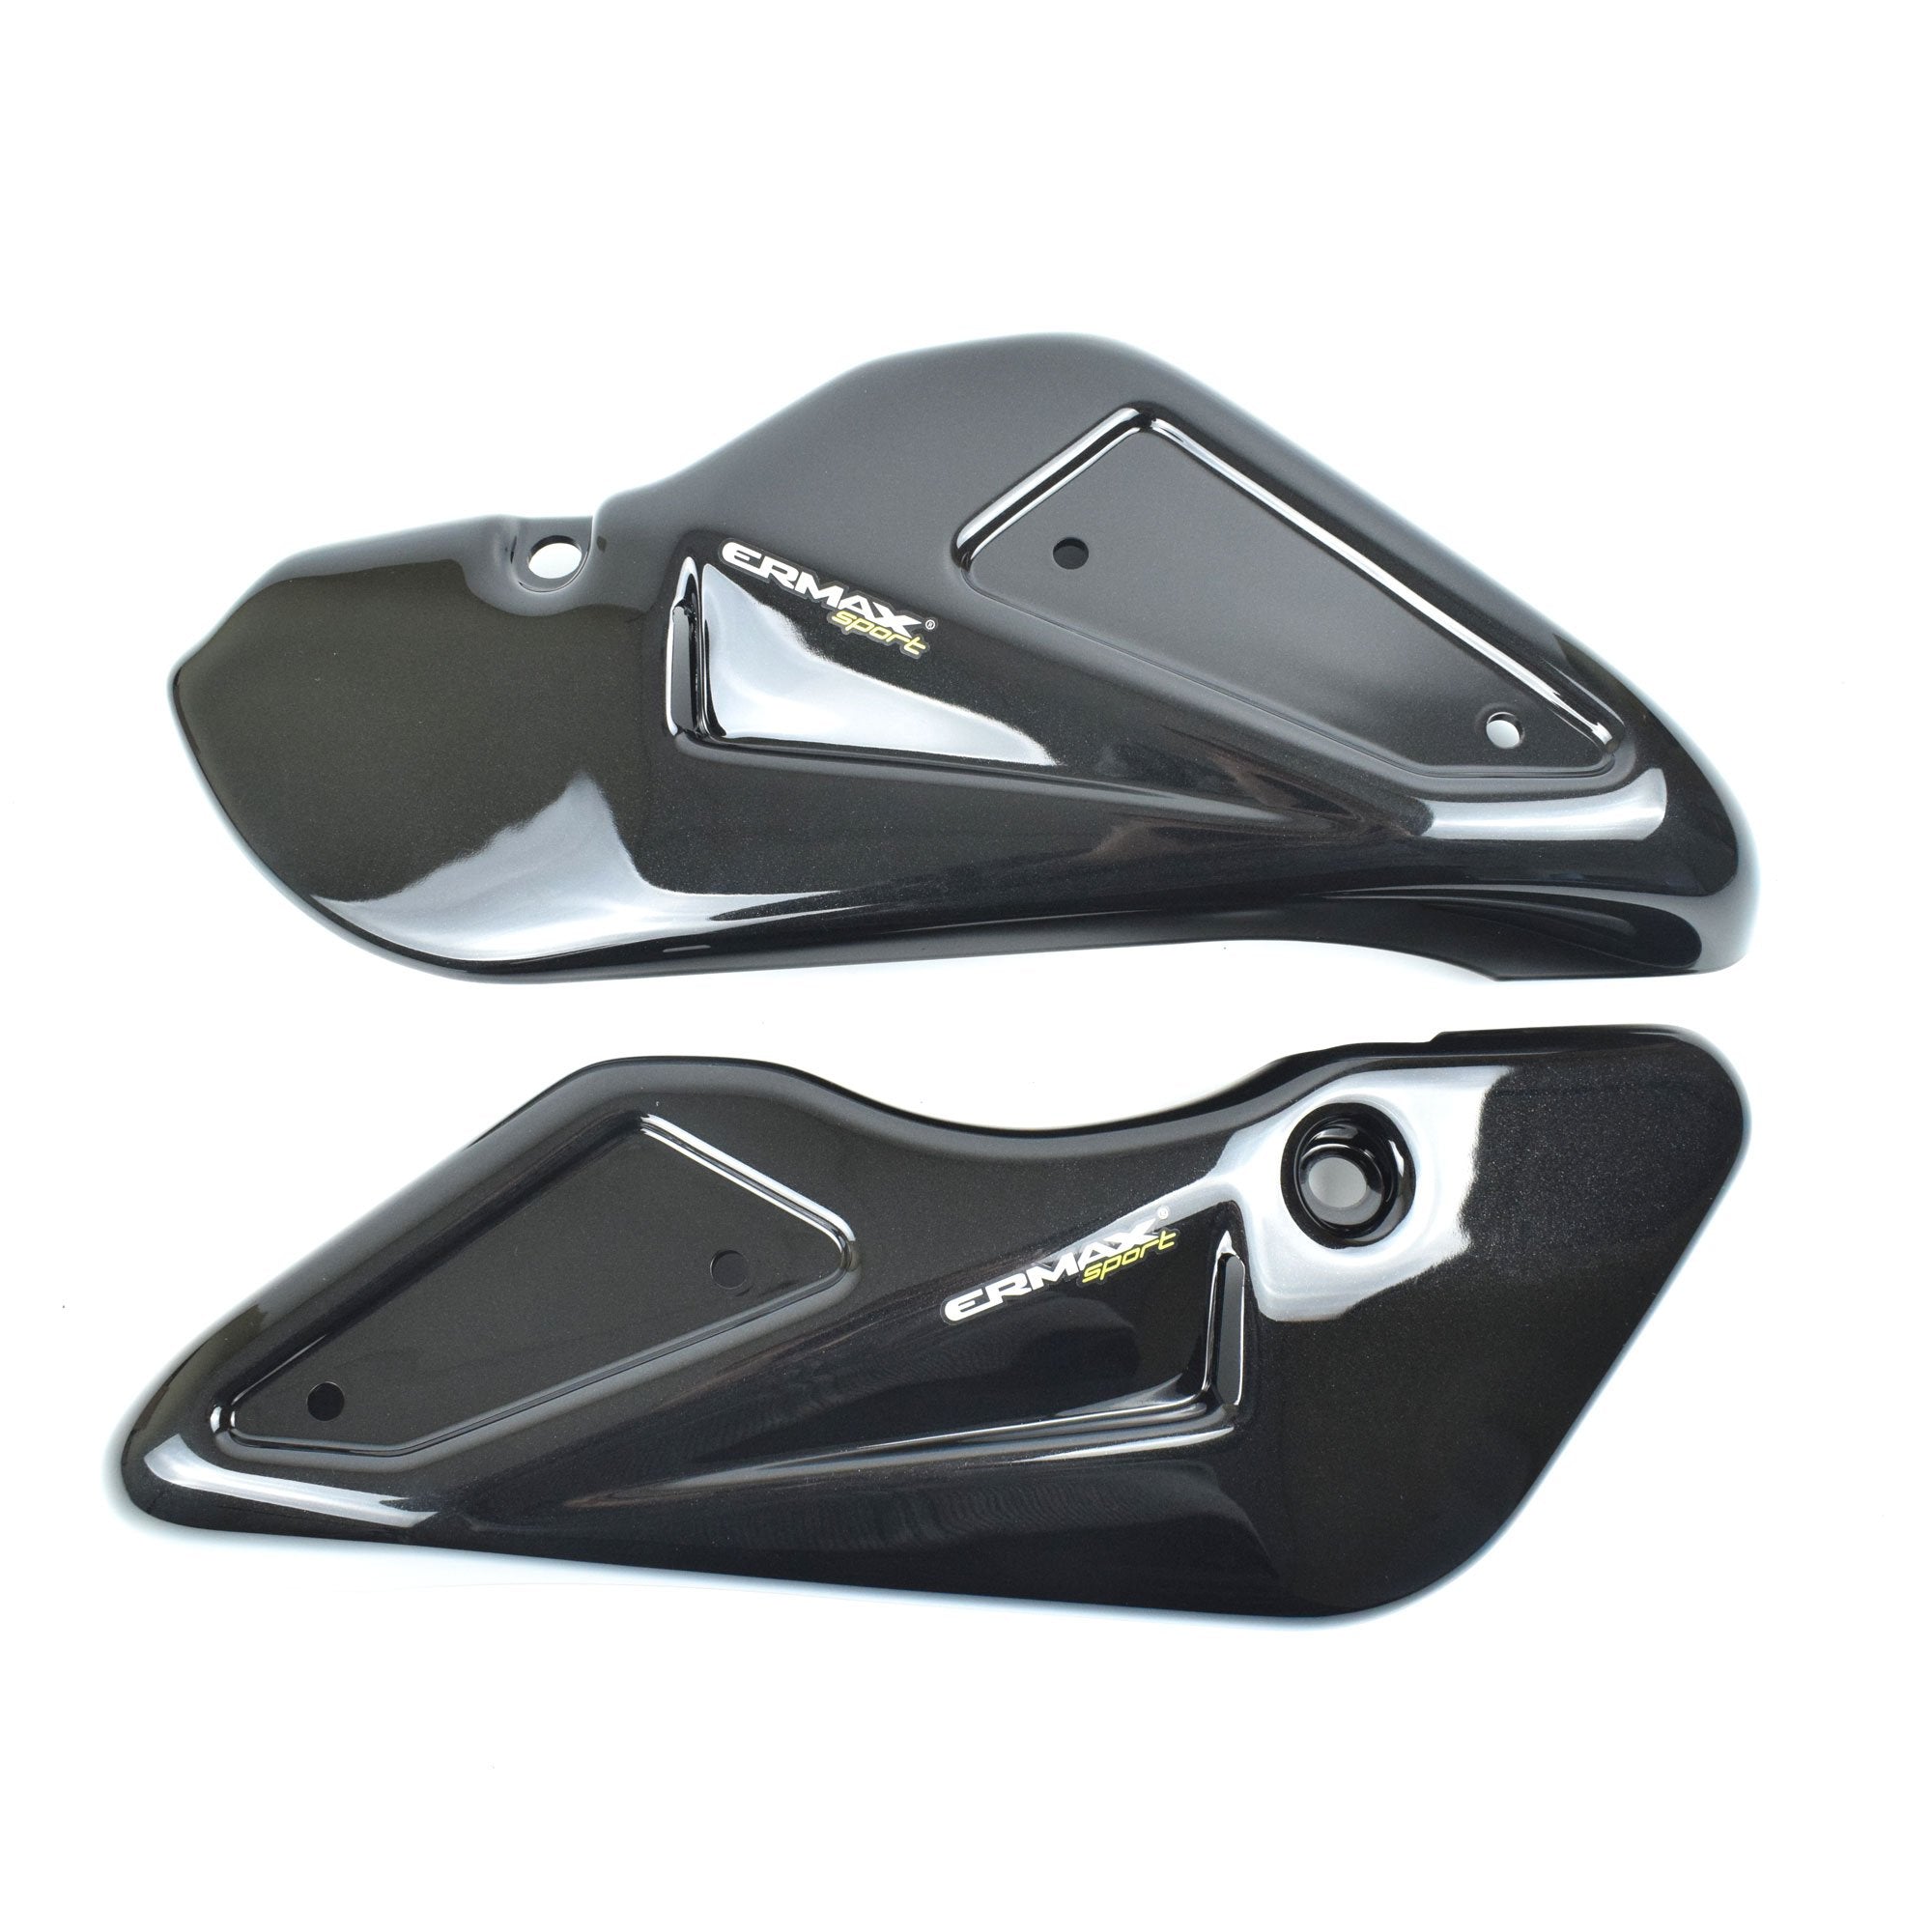 Ermax Belly Pan | Metallic Black (Spark Black) | Kawasaki Z 900 RS 2017>Current-E8903S68-65-Belly Pans-Pyramid Motorcycle Accessories